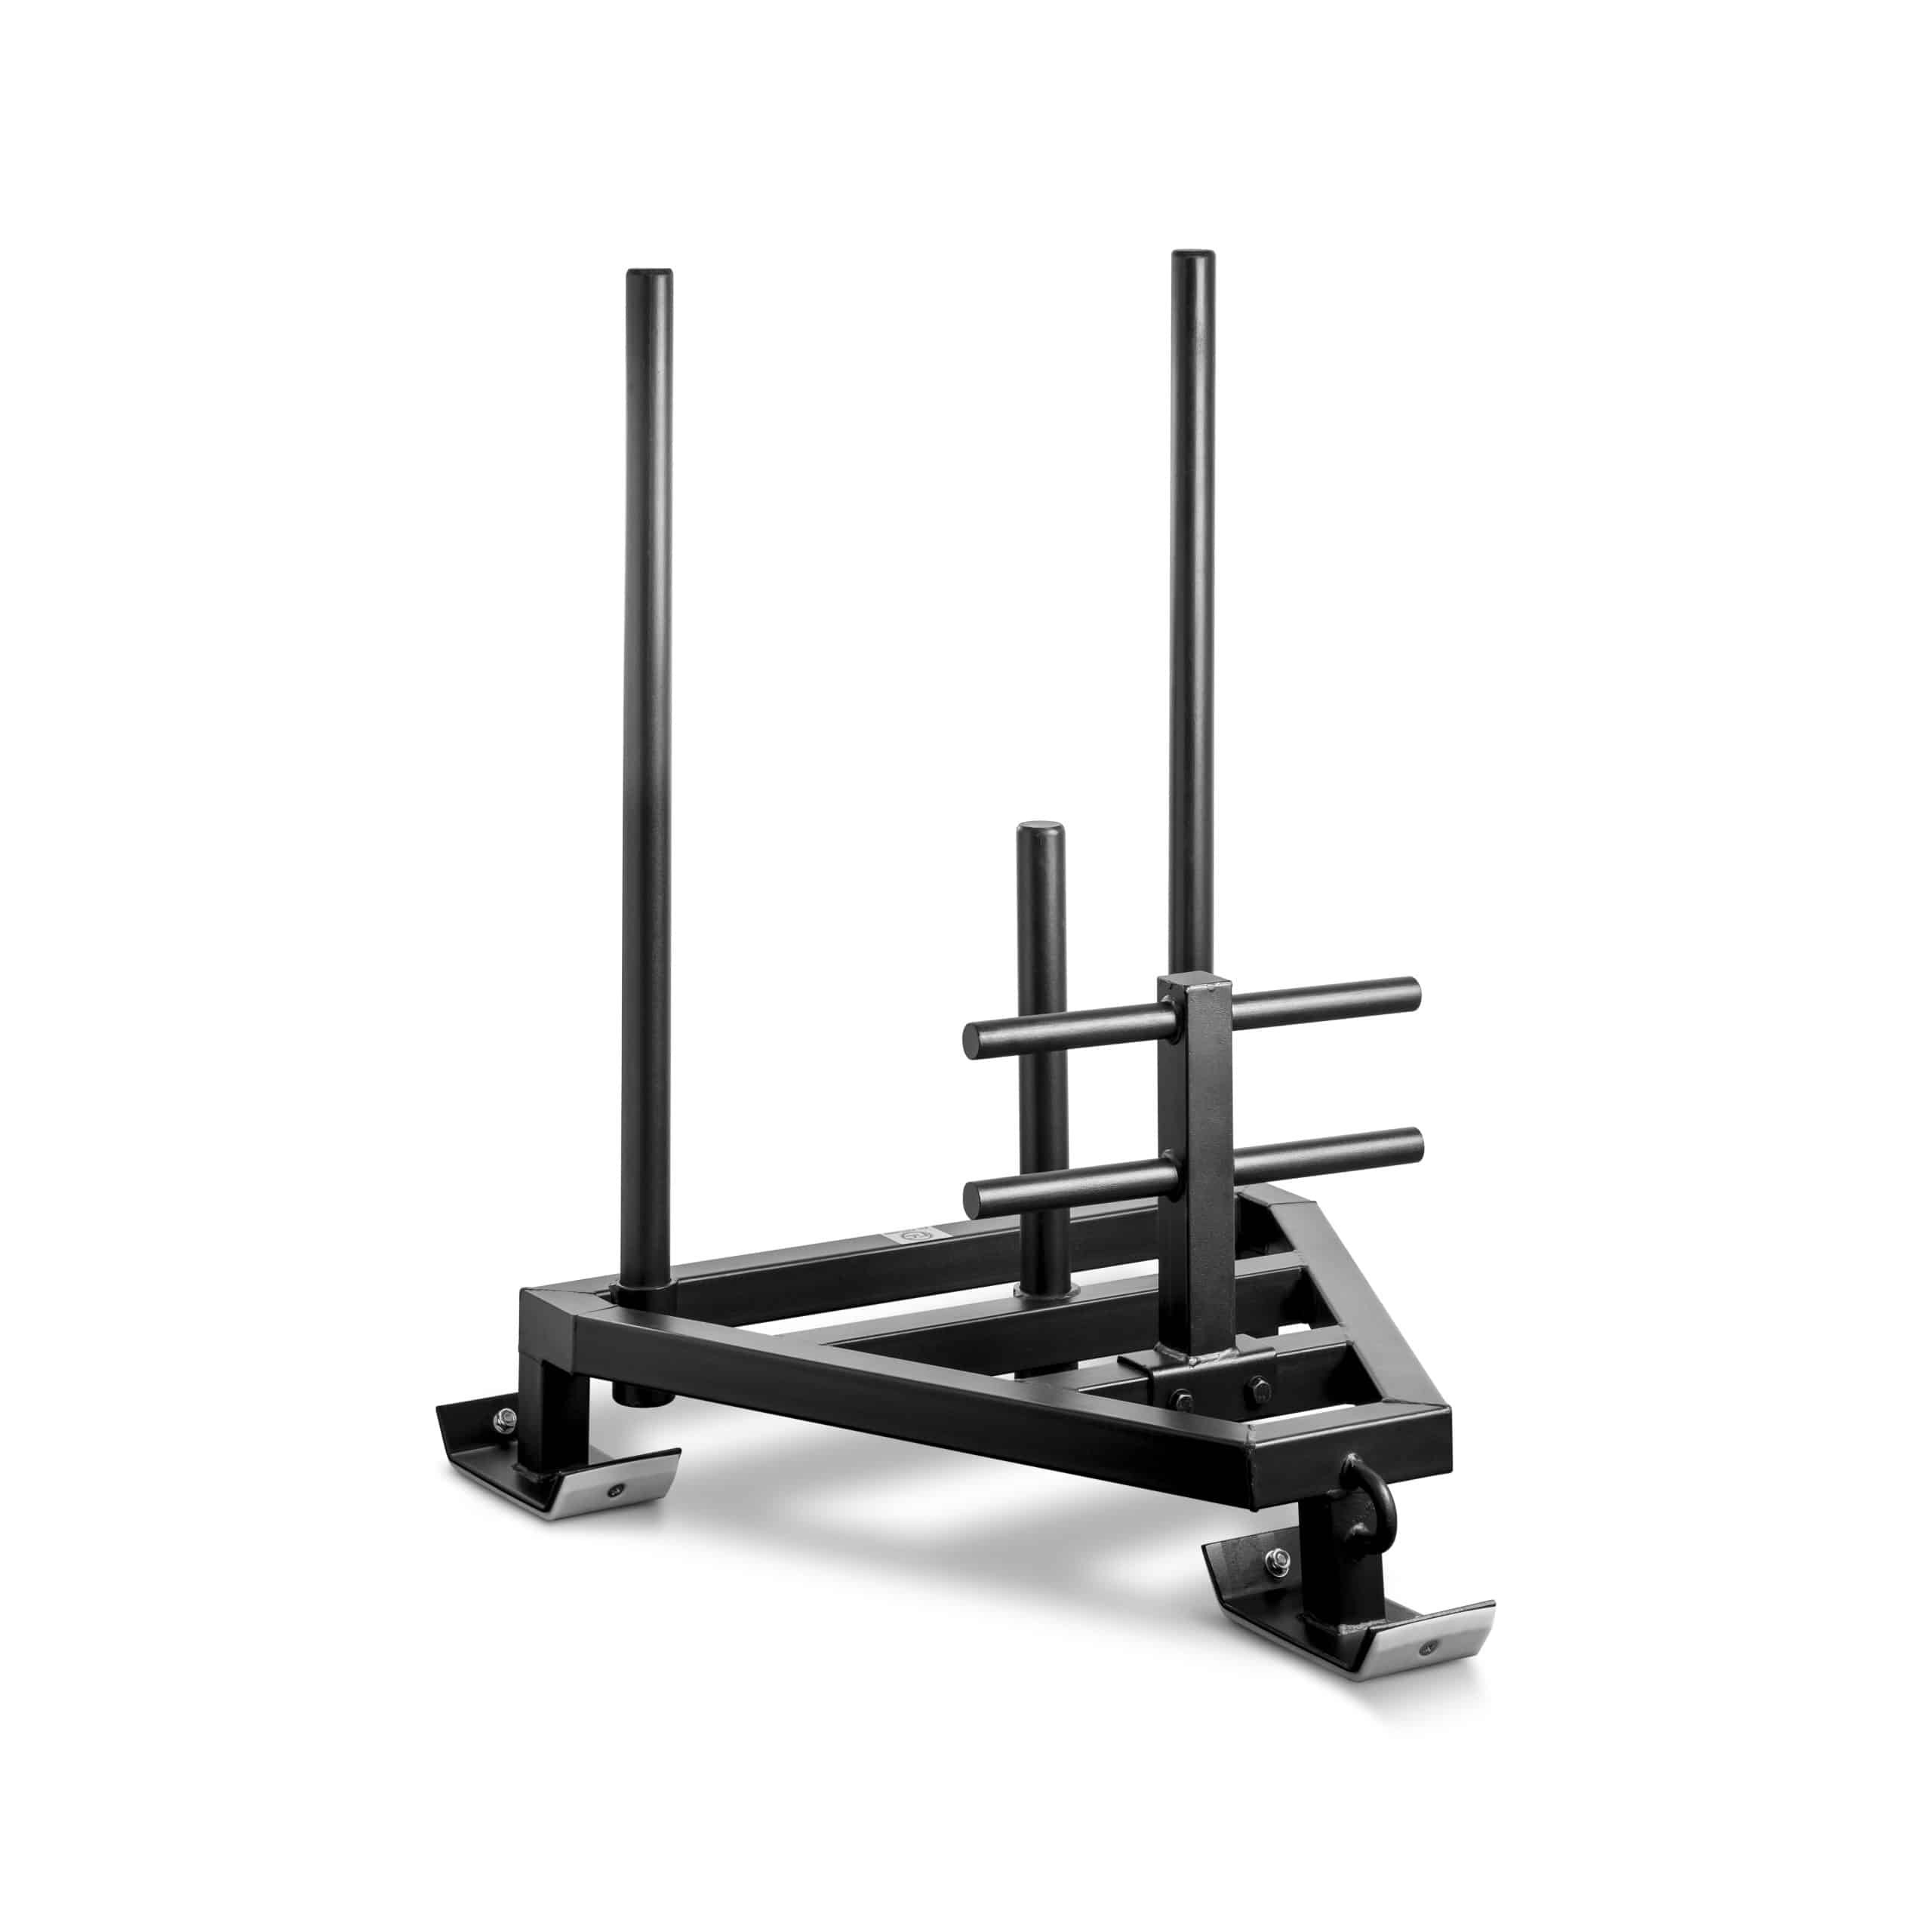 5 Day How Much Does A Workout Sled Weigh for Beginner